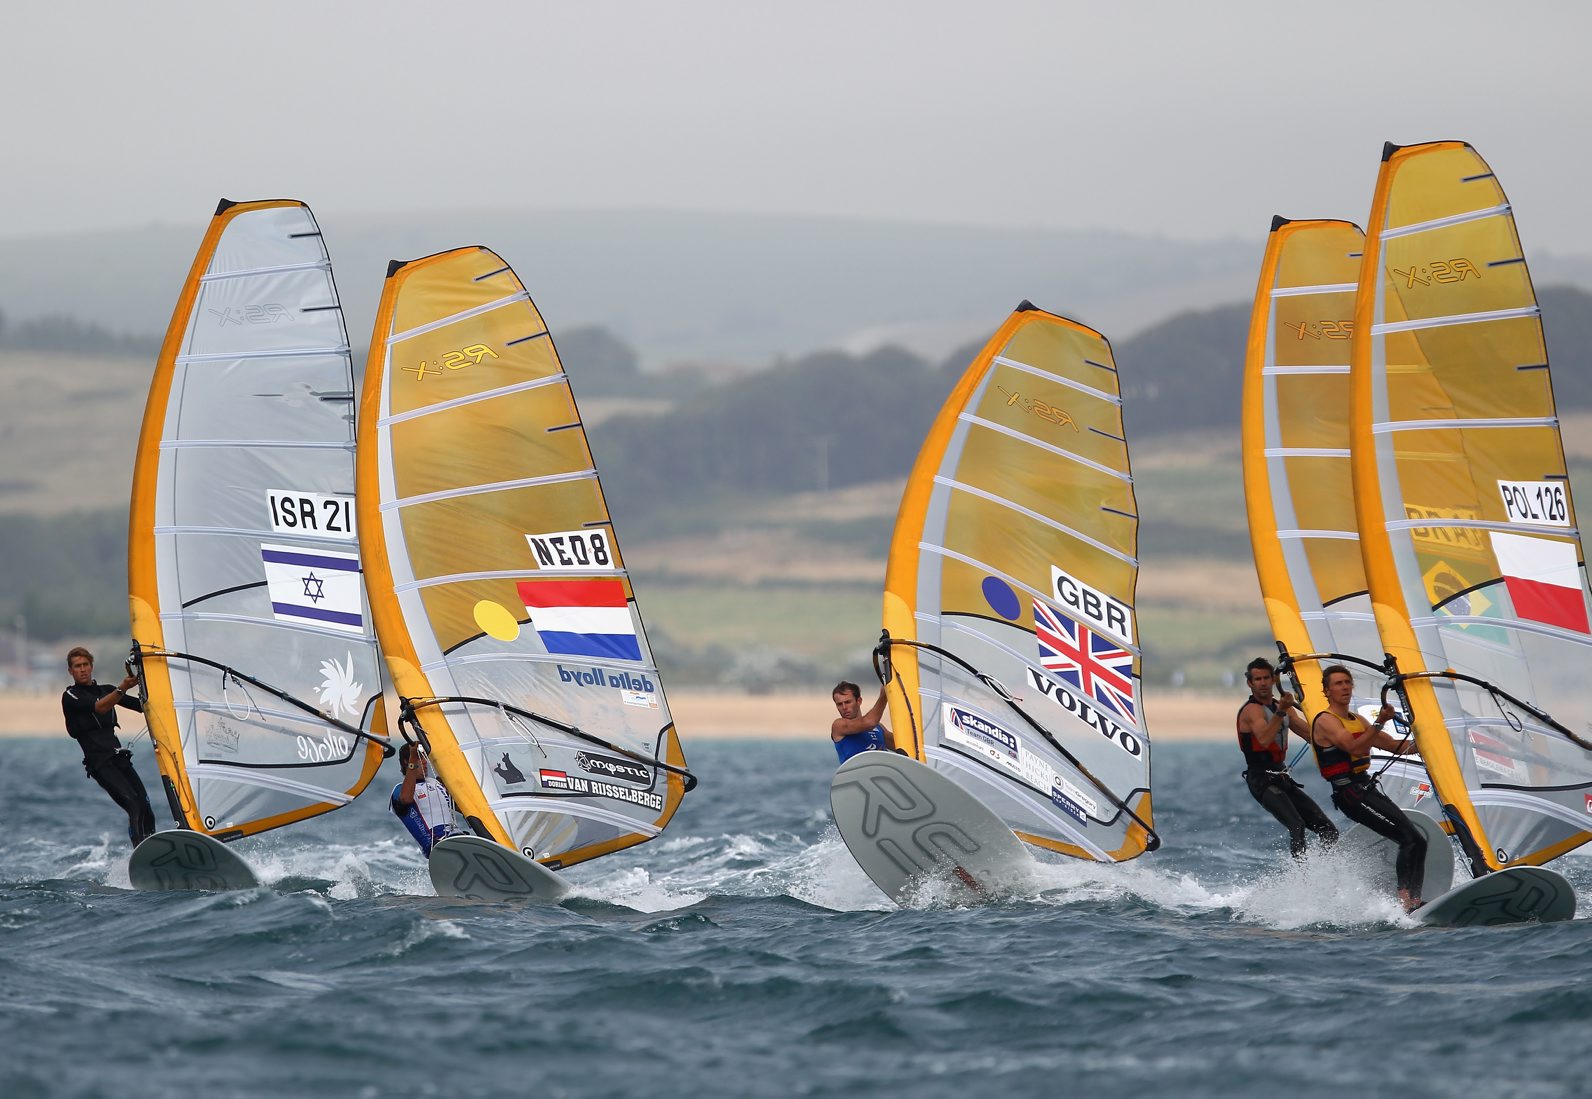 Nick_Dempsey_racing_at_Weymouth_August_11_2011